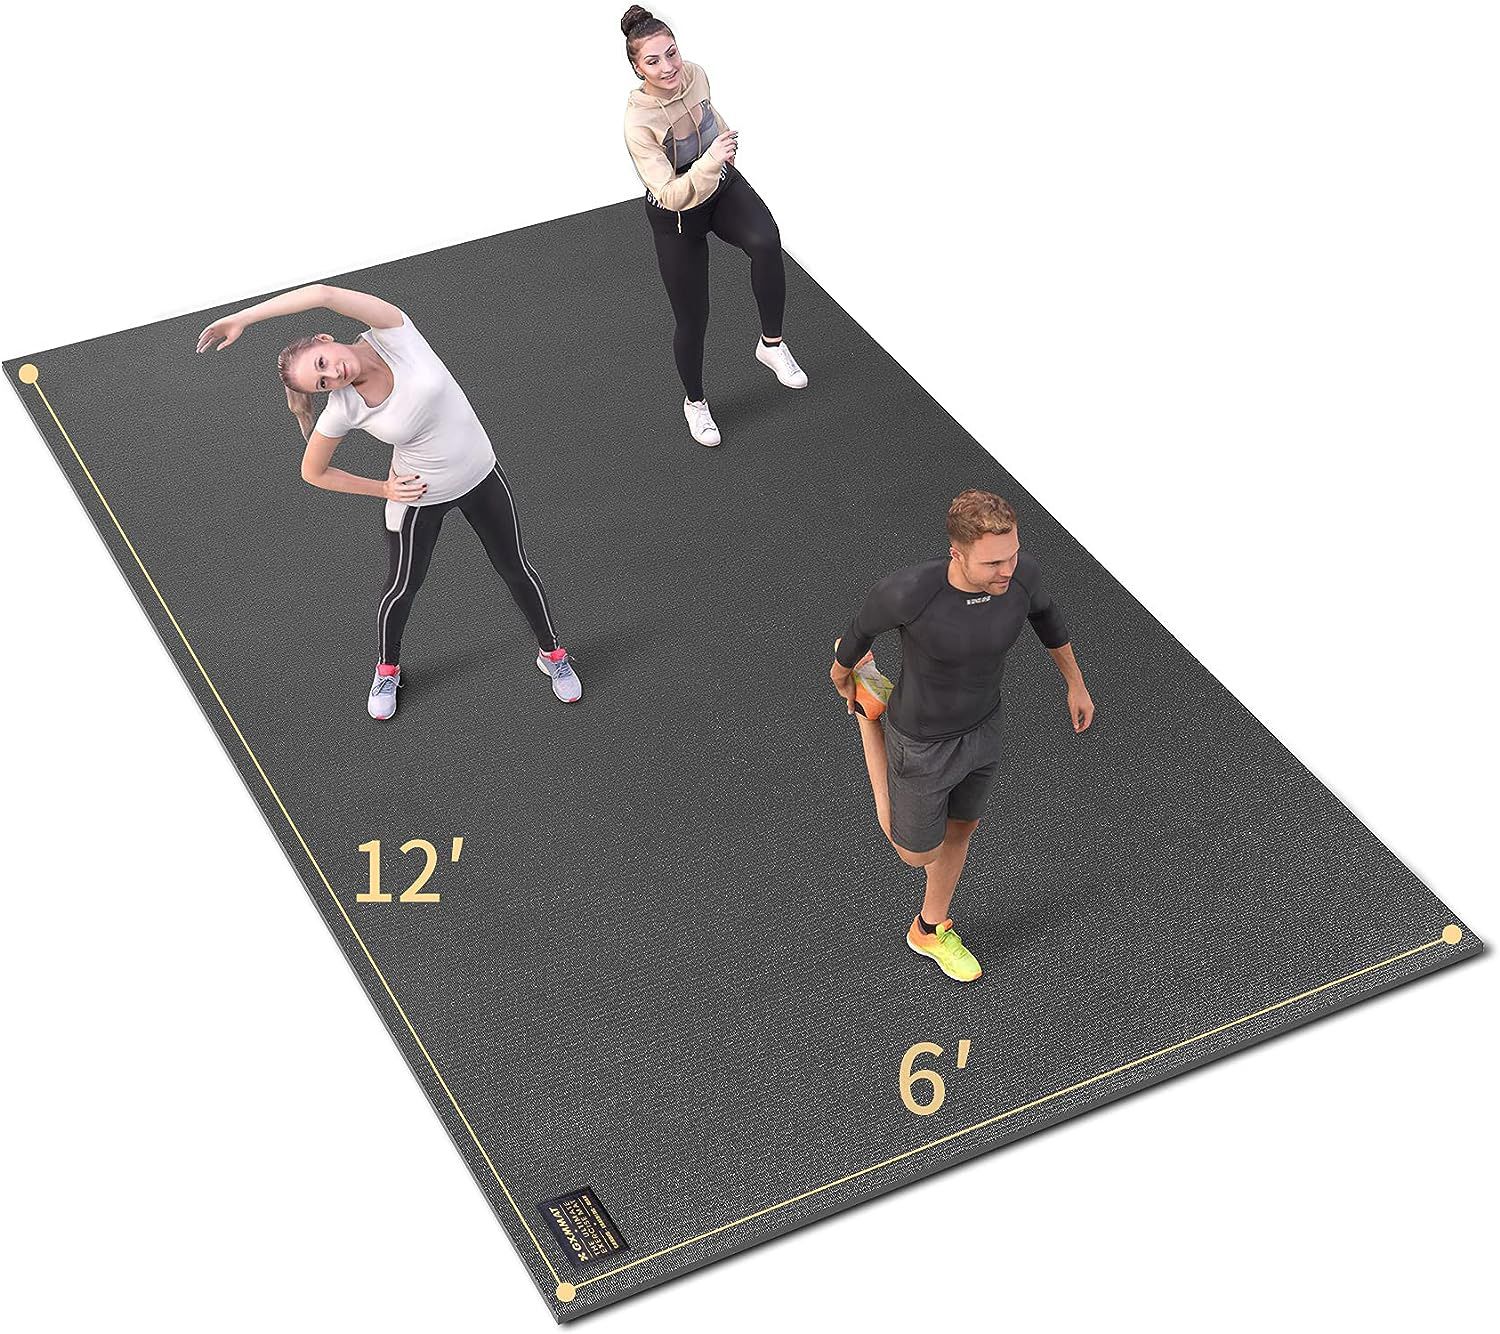 Brand New GXMMAT Extra Large Exercise Mat 12'x6'x7mm, Ultra Durable Workout Mats for Home Gym Flooring, Shoe-Friendly Non-Slip Cardio Mat for MMA, Ply